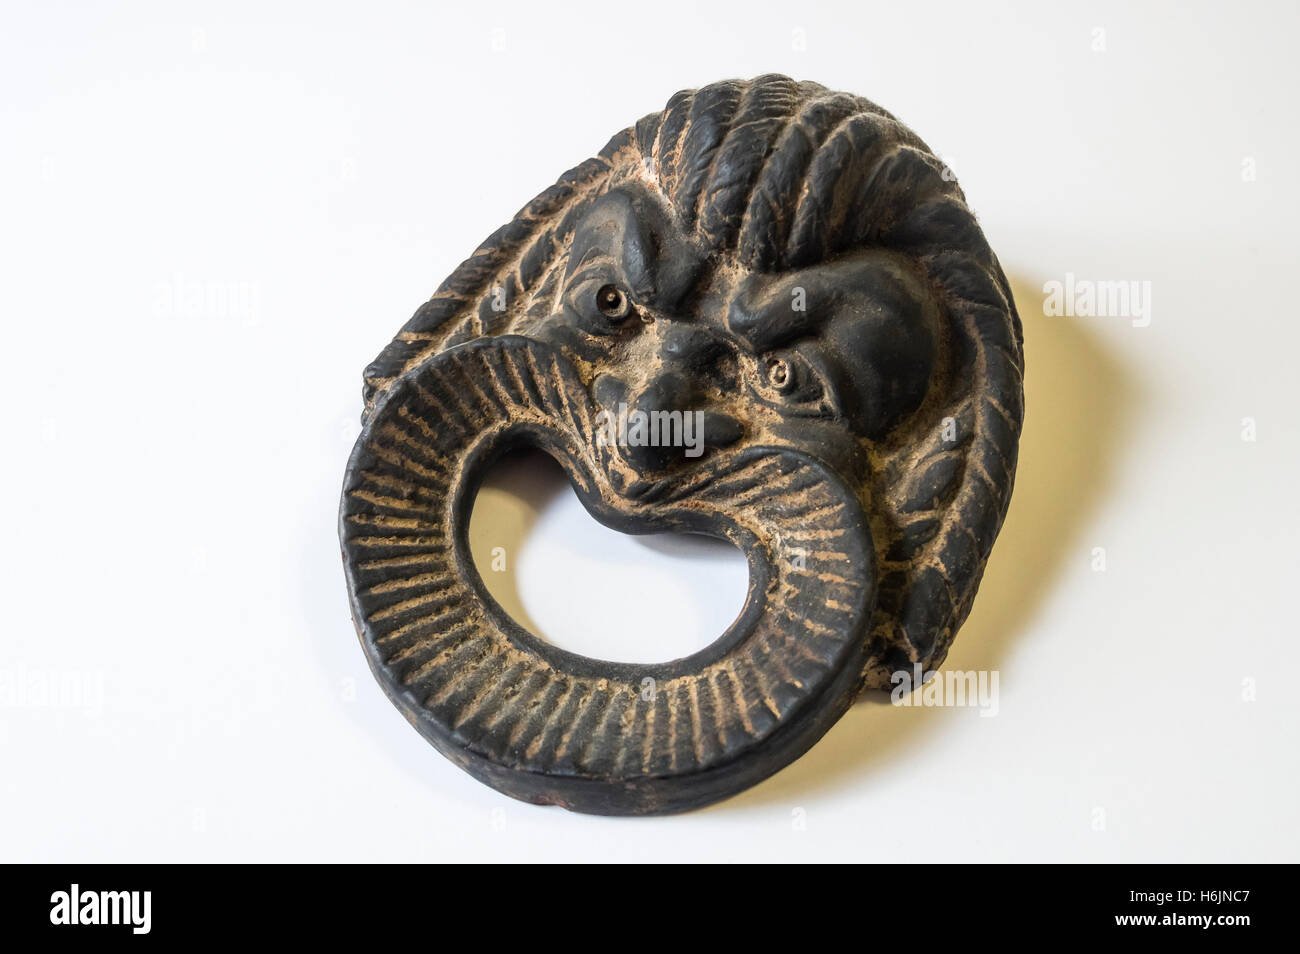 Fake Roman antiquity, a smiling theater mask Stock Photo